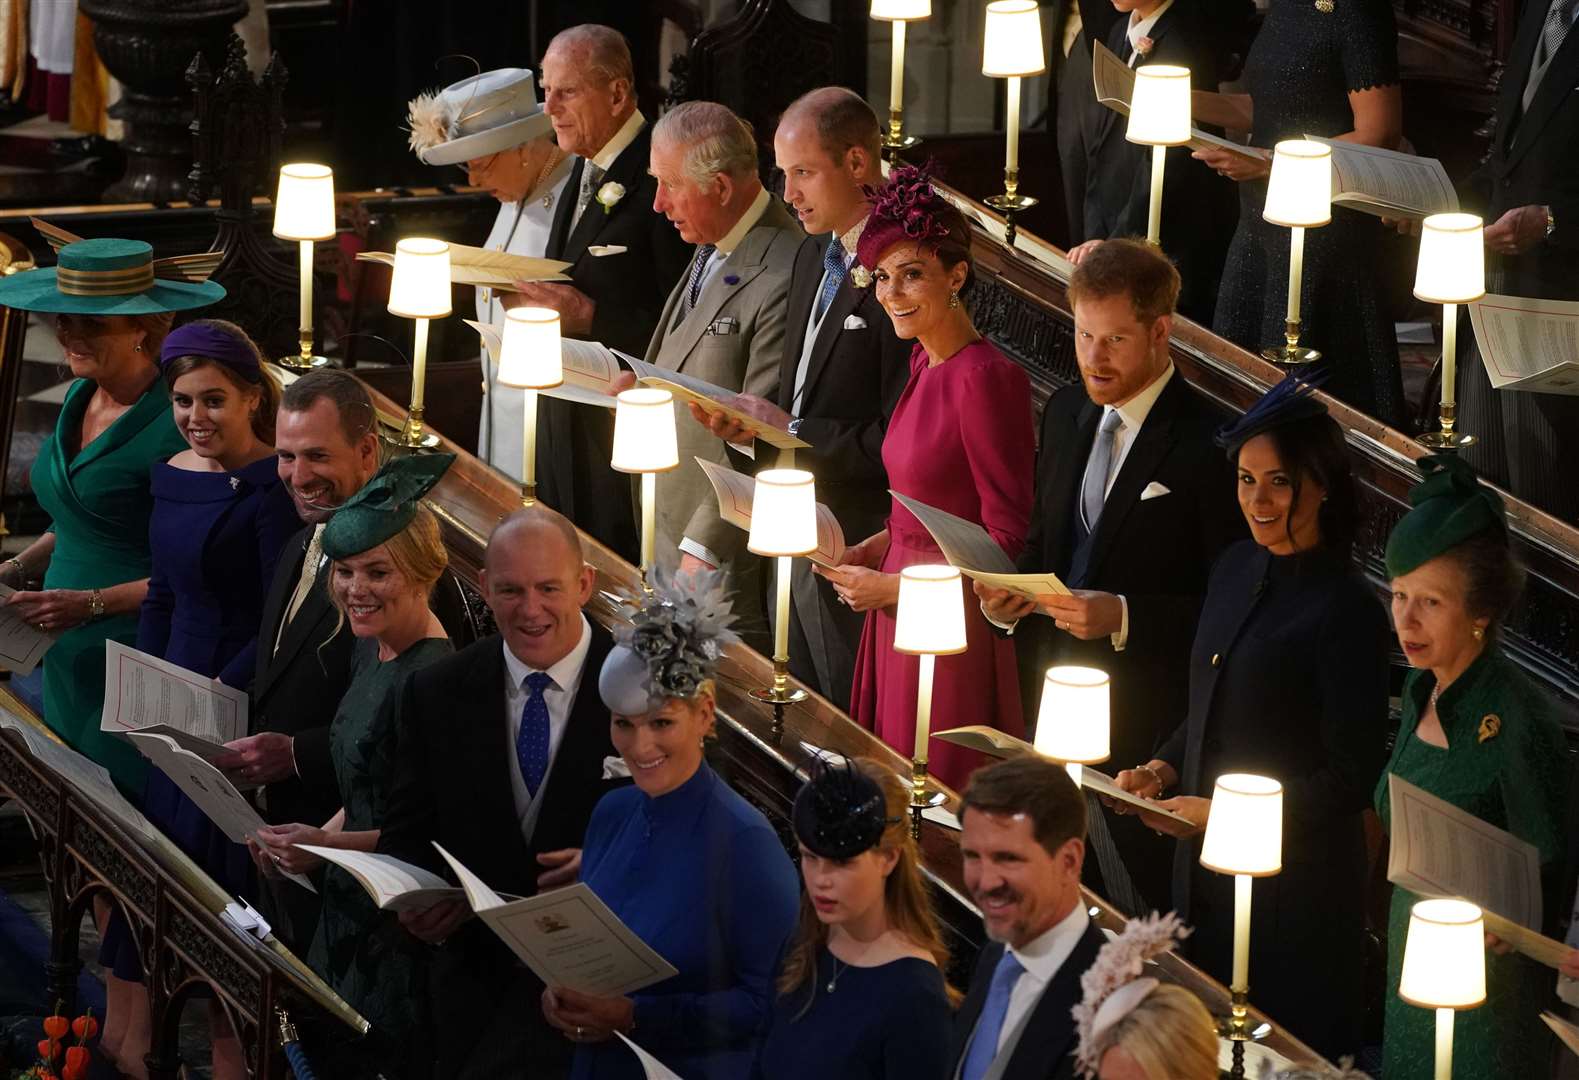 Members of the Royal Family, pictured here with The Queen, will mourn for seven days after the date of her funeral. Photo credit should read: Owen Humphreys/PA Wire.